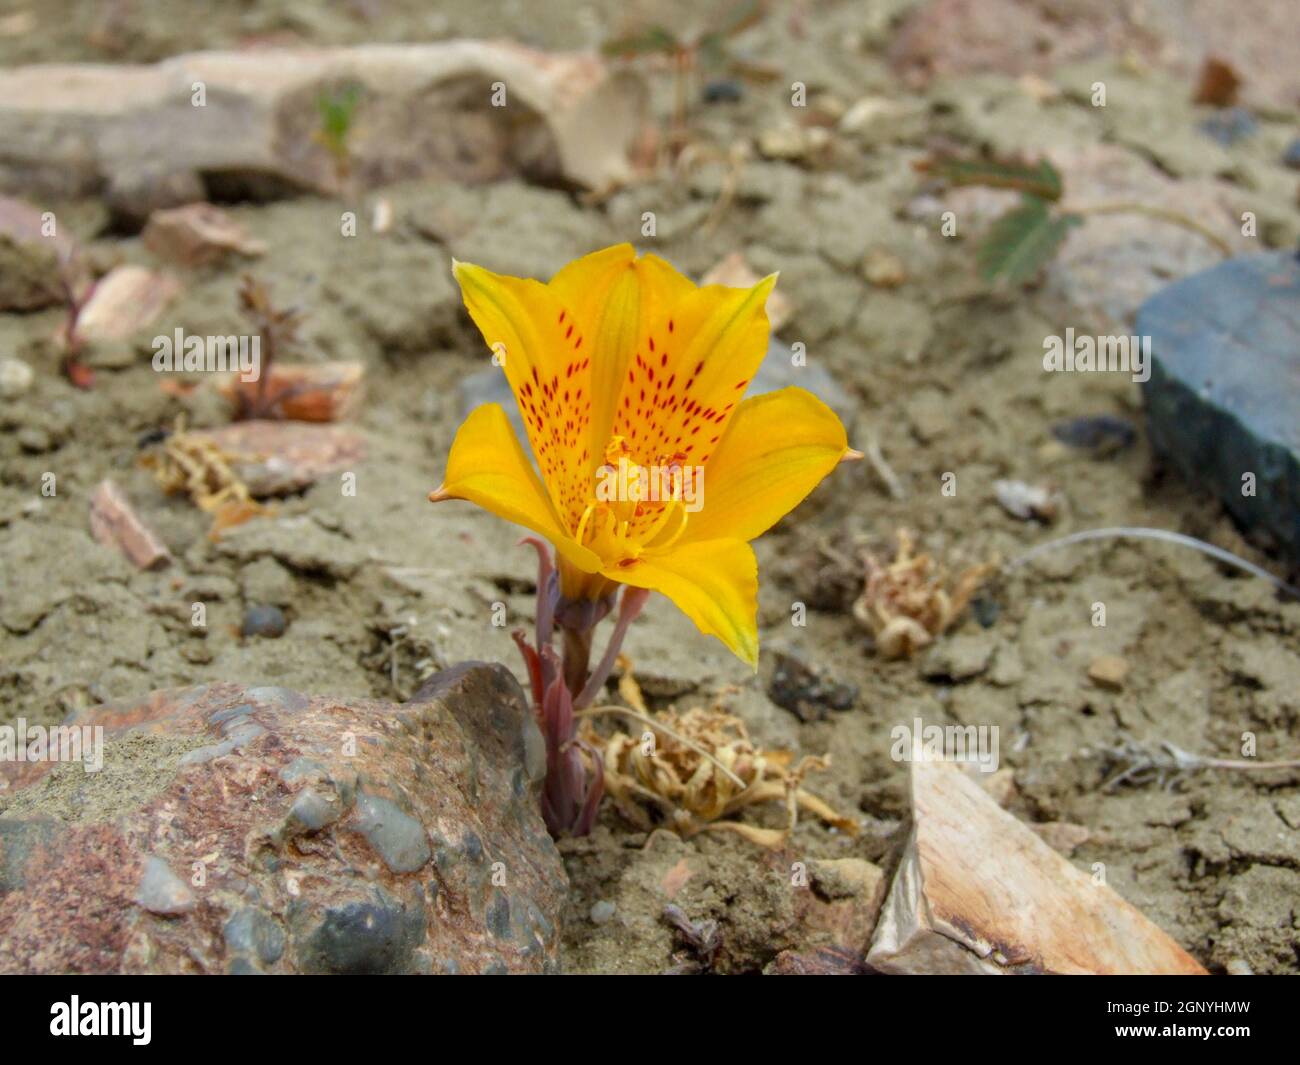 Amancay (Alstroemeria patagonica), yellow flower of patagonian steppe Stock Photo